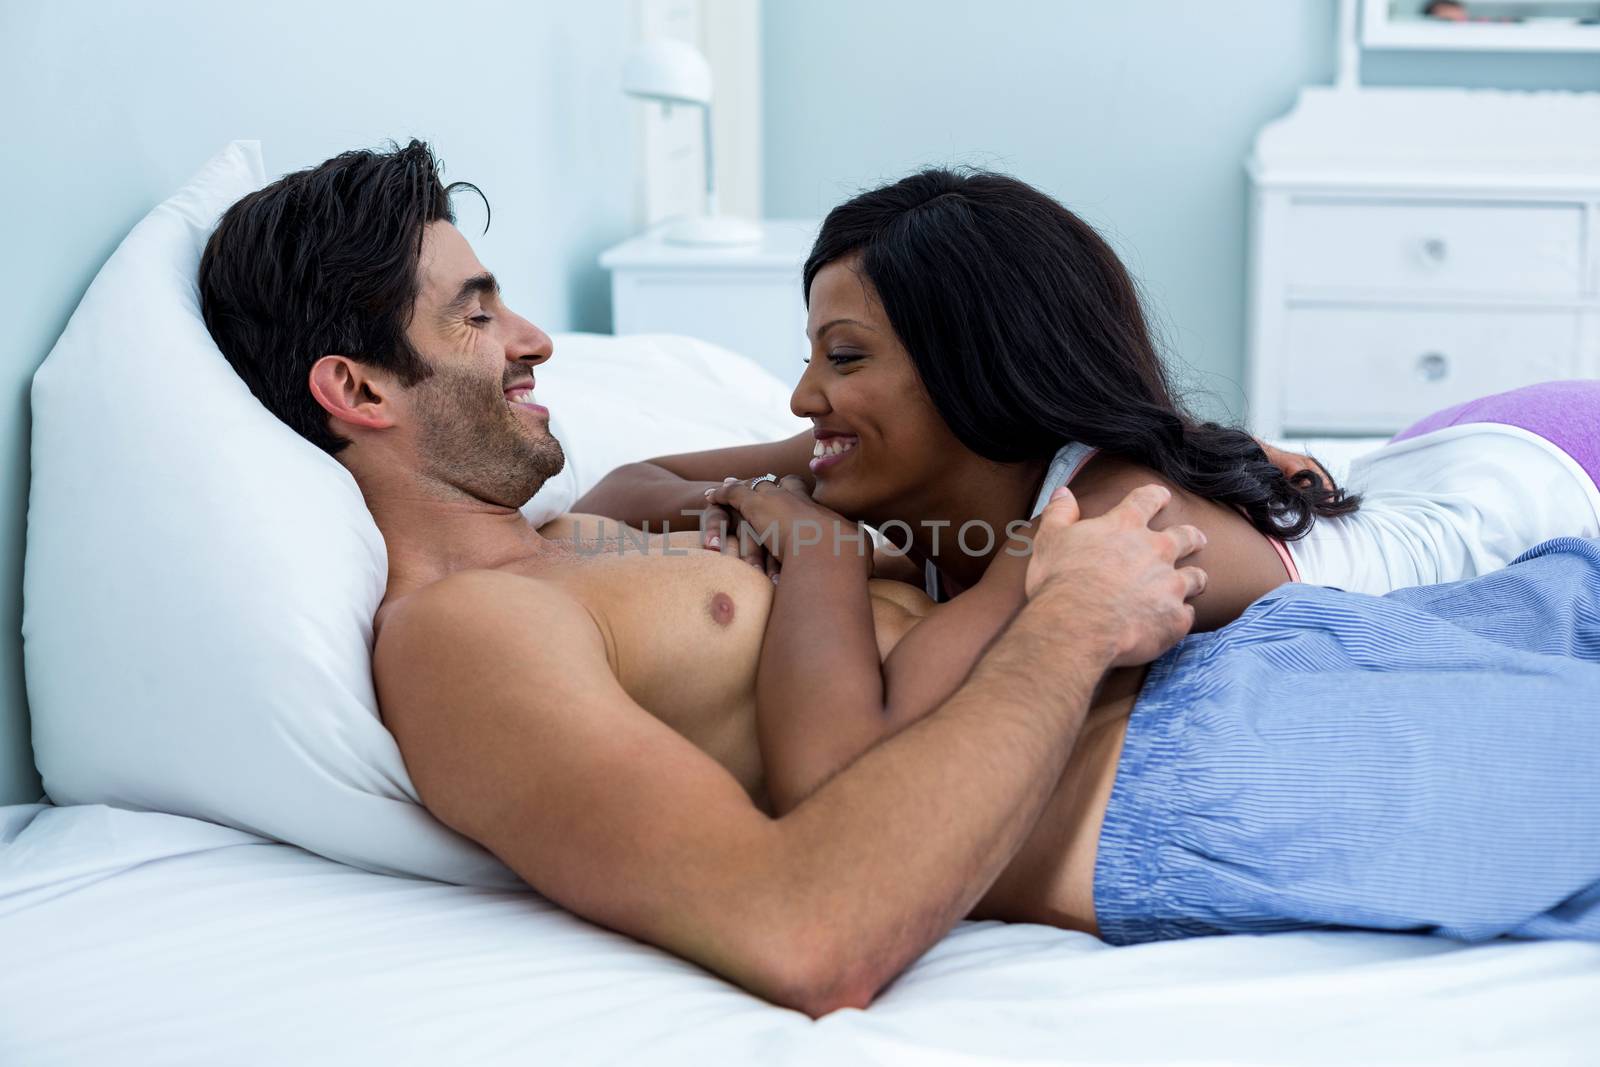 Romantic couple lying together on bed by Wavebreakmedia